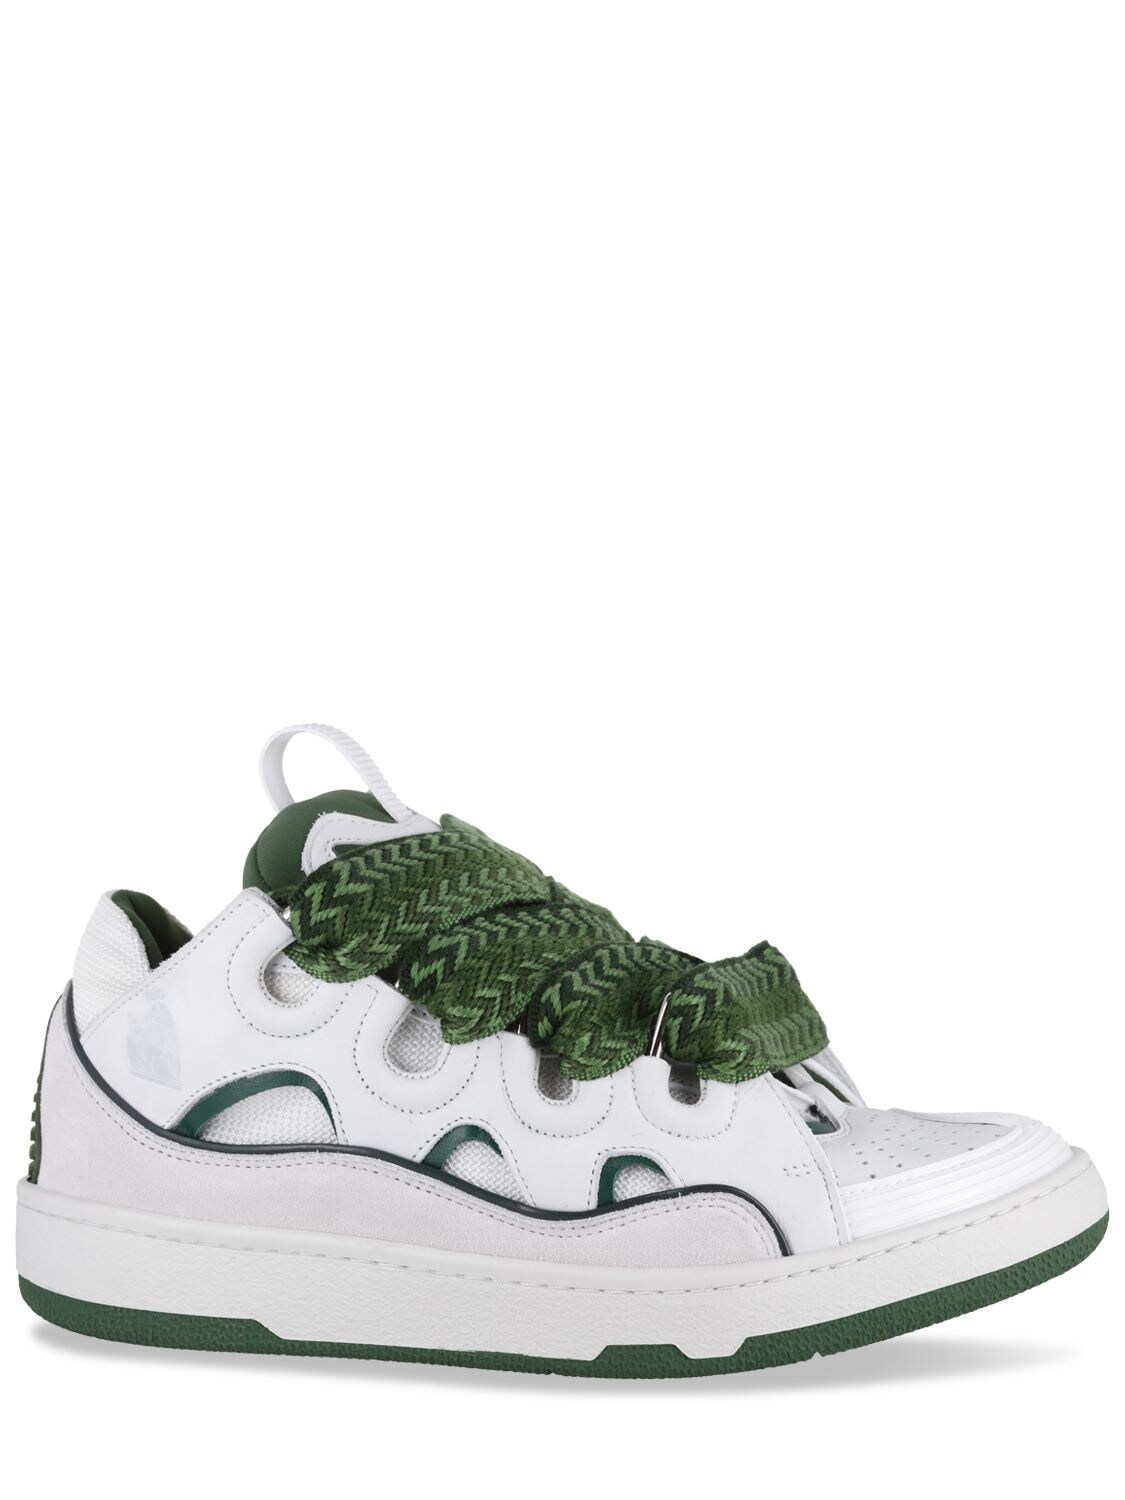 Lanvin 30mm Curb Leather & Mesh Sneakers In White,khaki